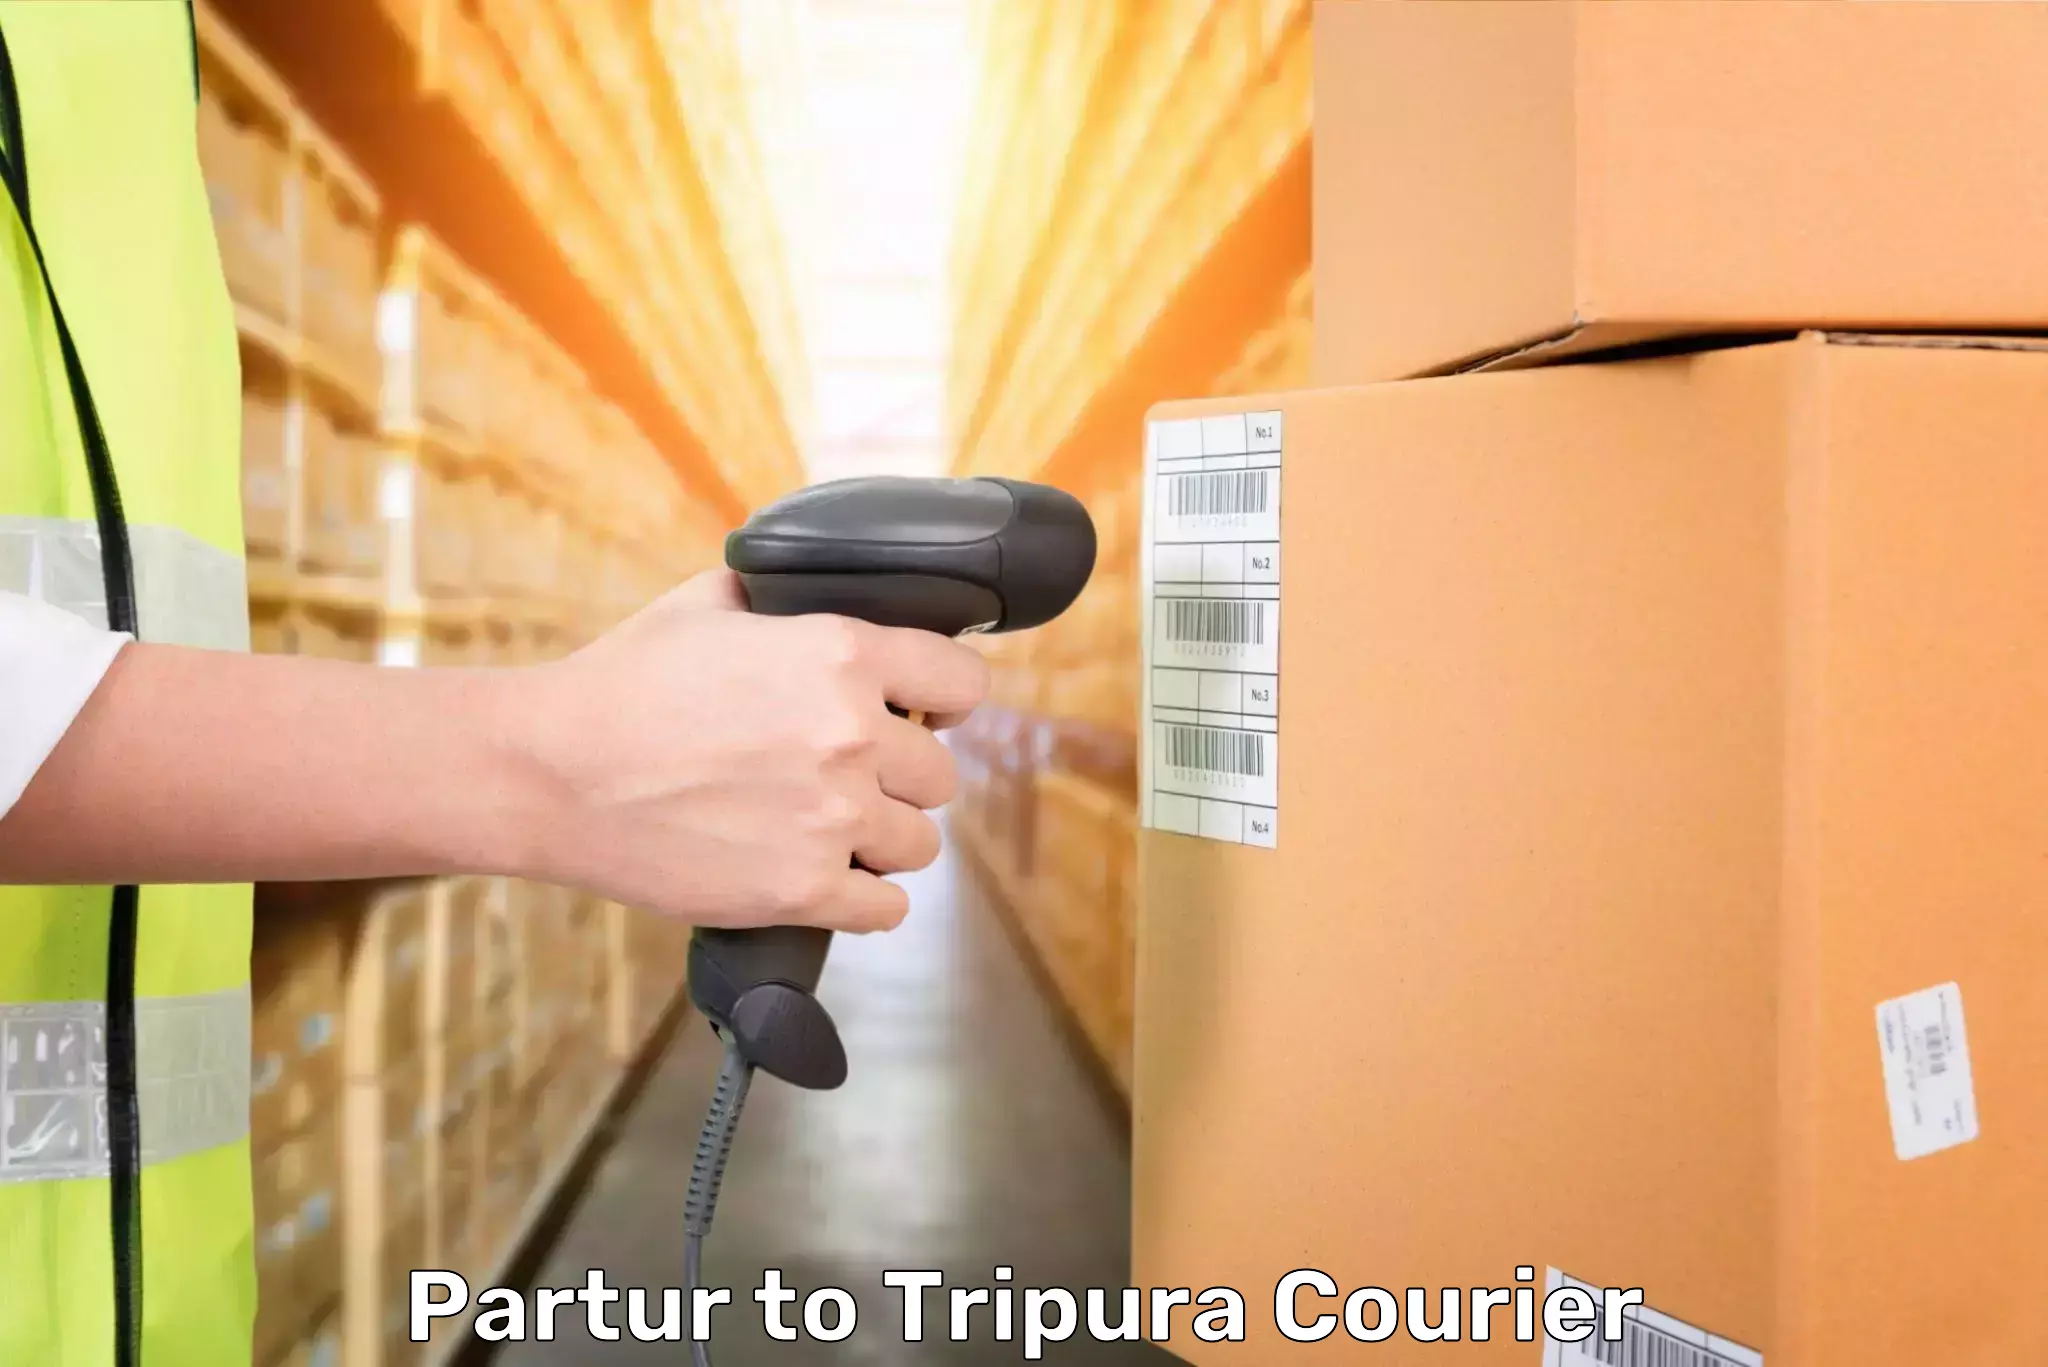 Luggage transport solutions Partur to Tripura